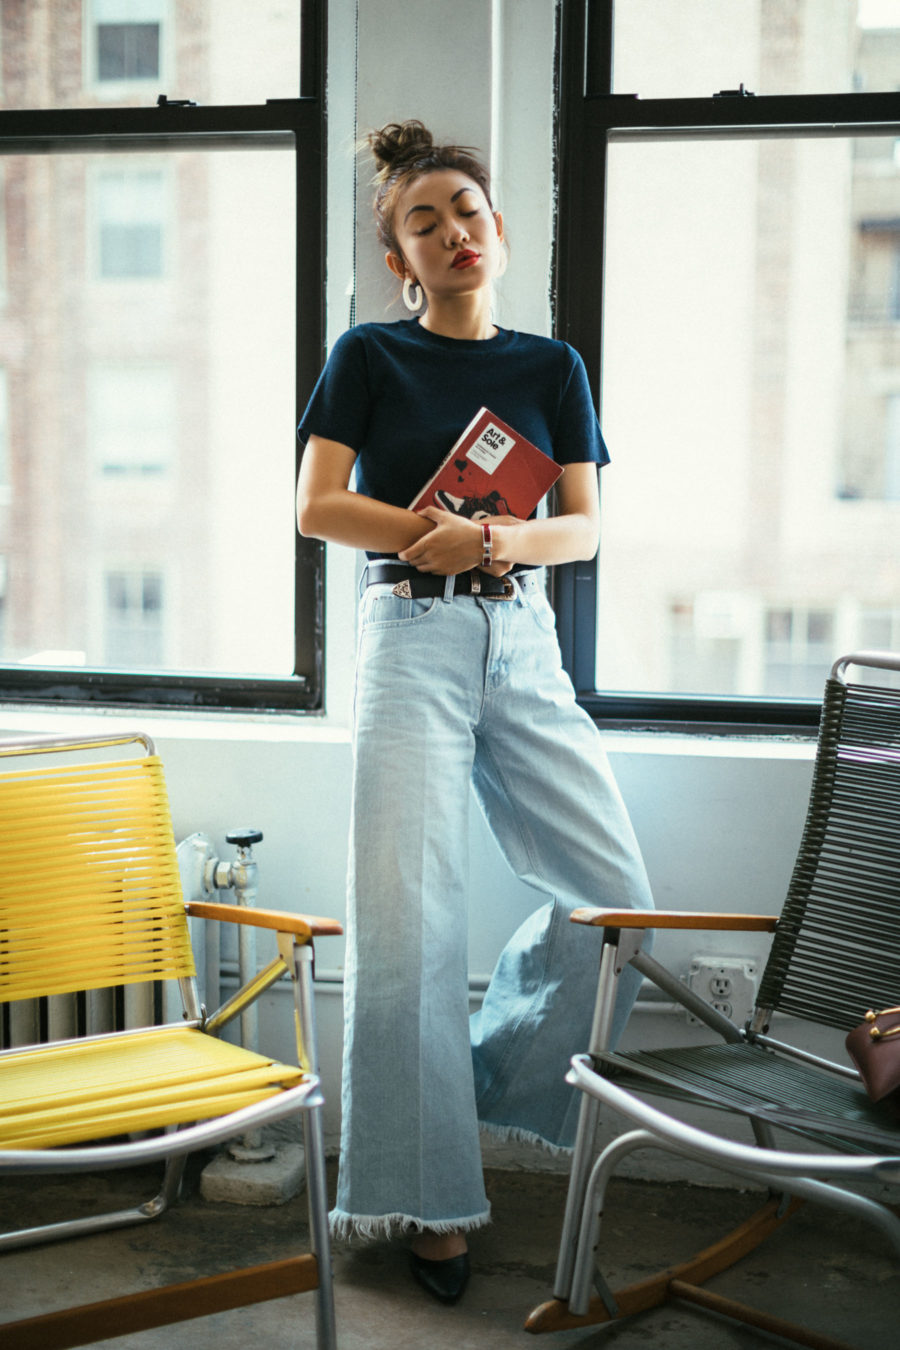 fashion blogger jessica wang shares how to style your graphic tee with wide leg jeans and pointed toe mules // Jessica Wang - NotJessFashion.com